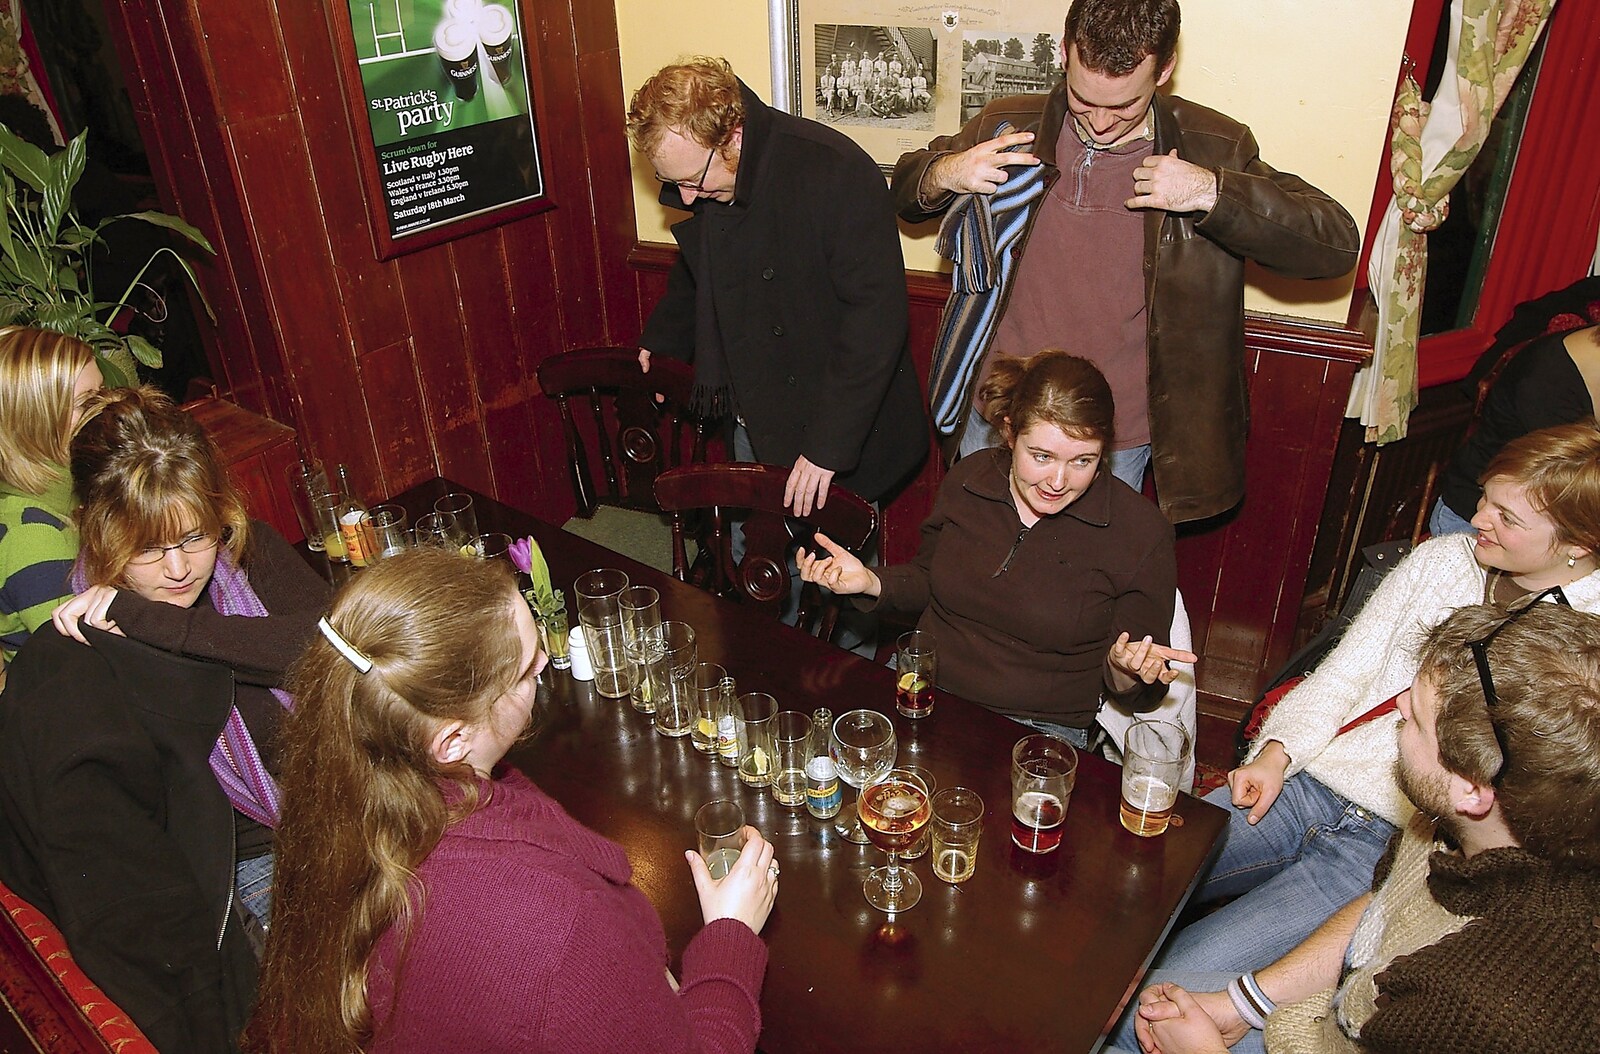 There's an impressive line-up of used glasses from Wrecked Cars, A Night Out and Stick Game in the Cherry Tree, Cambridge and Yaxley, Suffolk- 24th February 2006